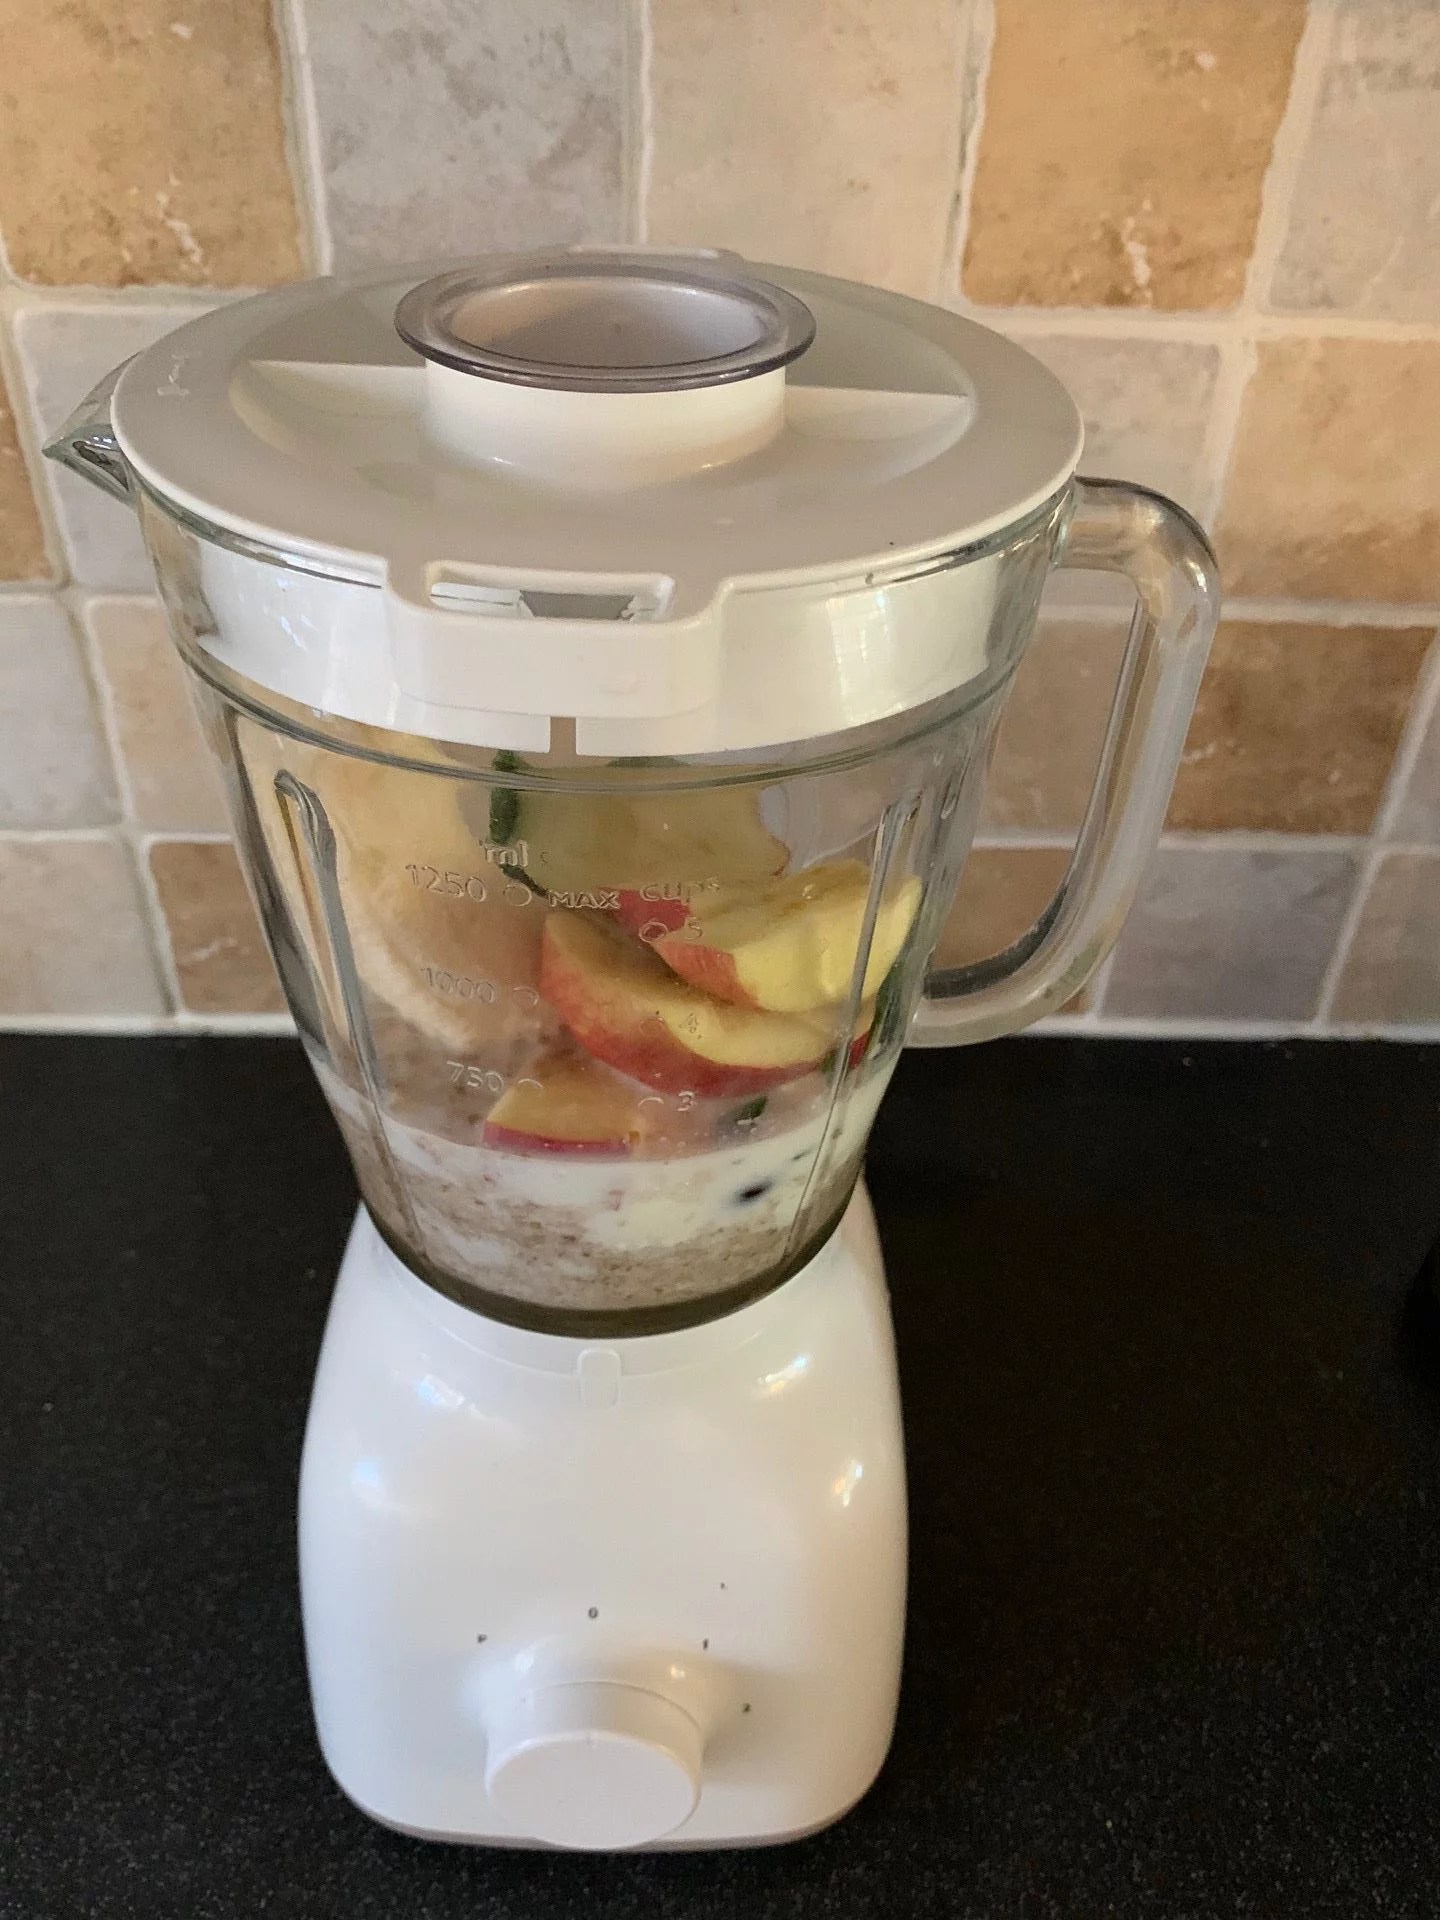 How To Make Smoothies In a Blender